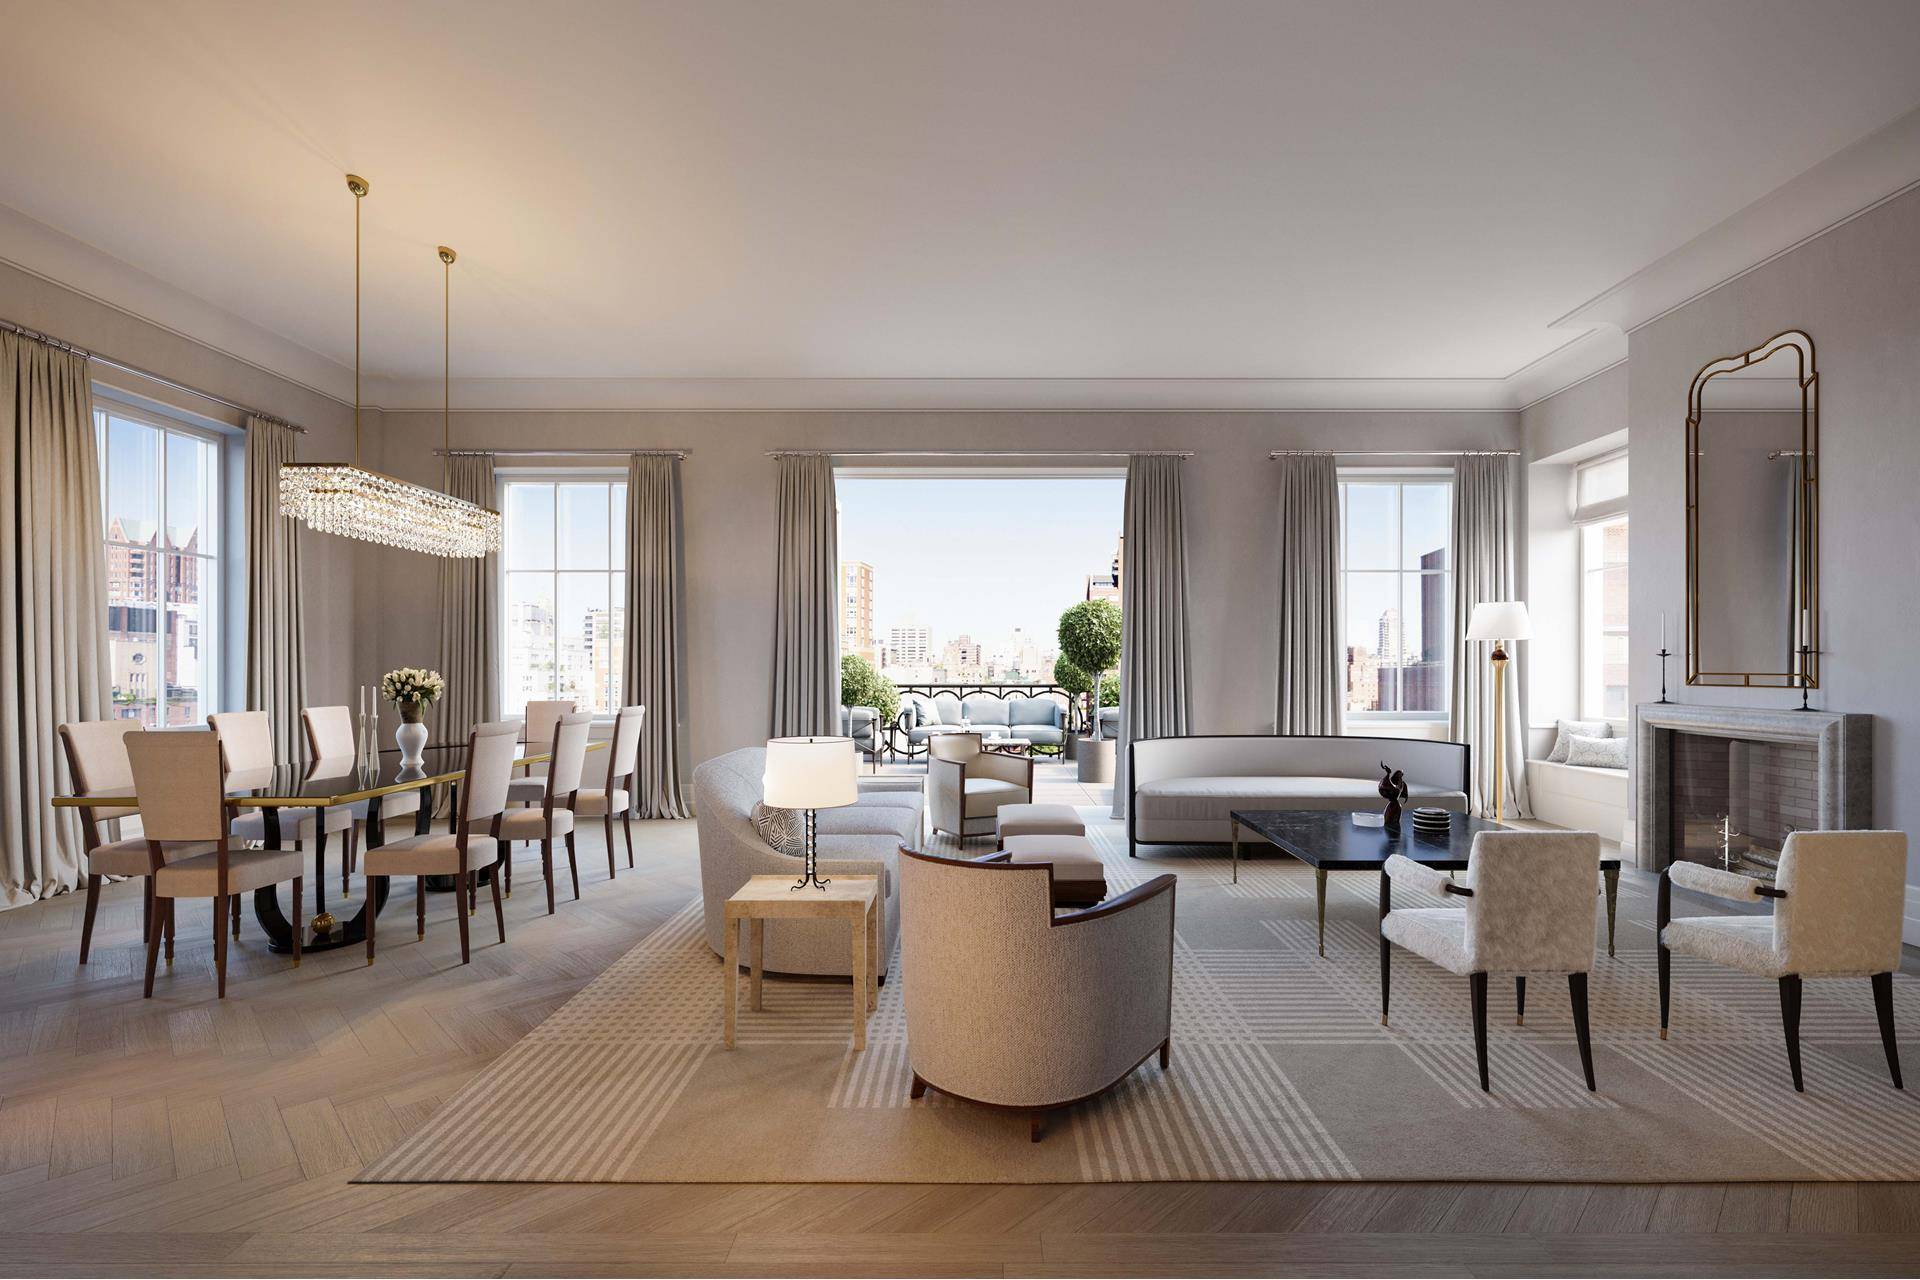 Private appointments now available Immediate occupancyUnveiling Beckford House Penthouse 19, an elegant full floor 2, 977 square foot three bedroom, three and a half bathroom residence, with two west facing ...